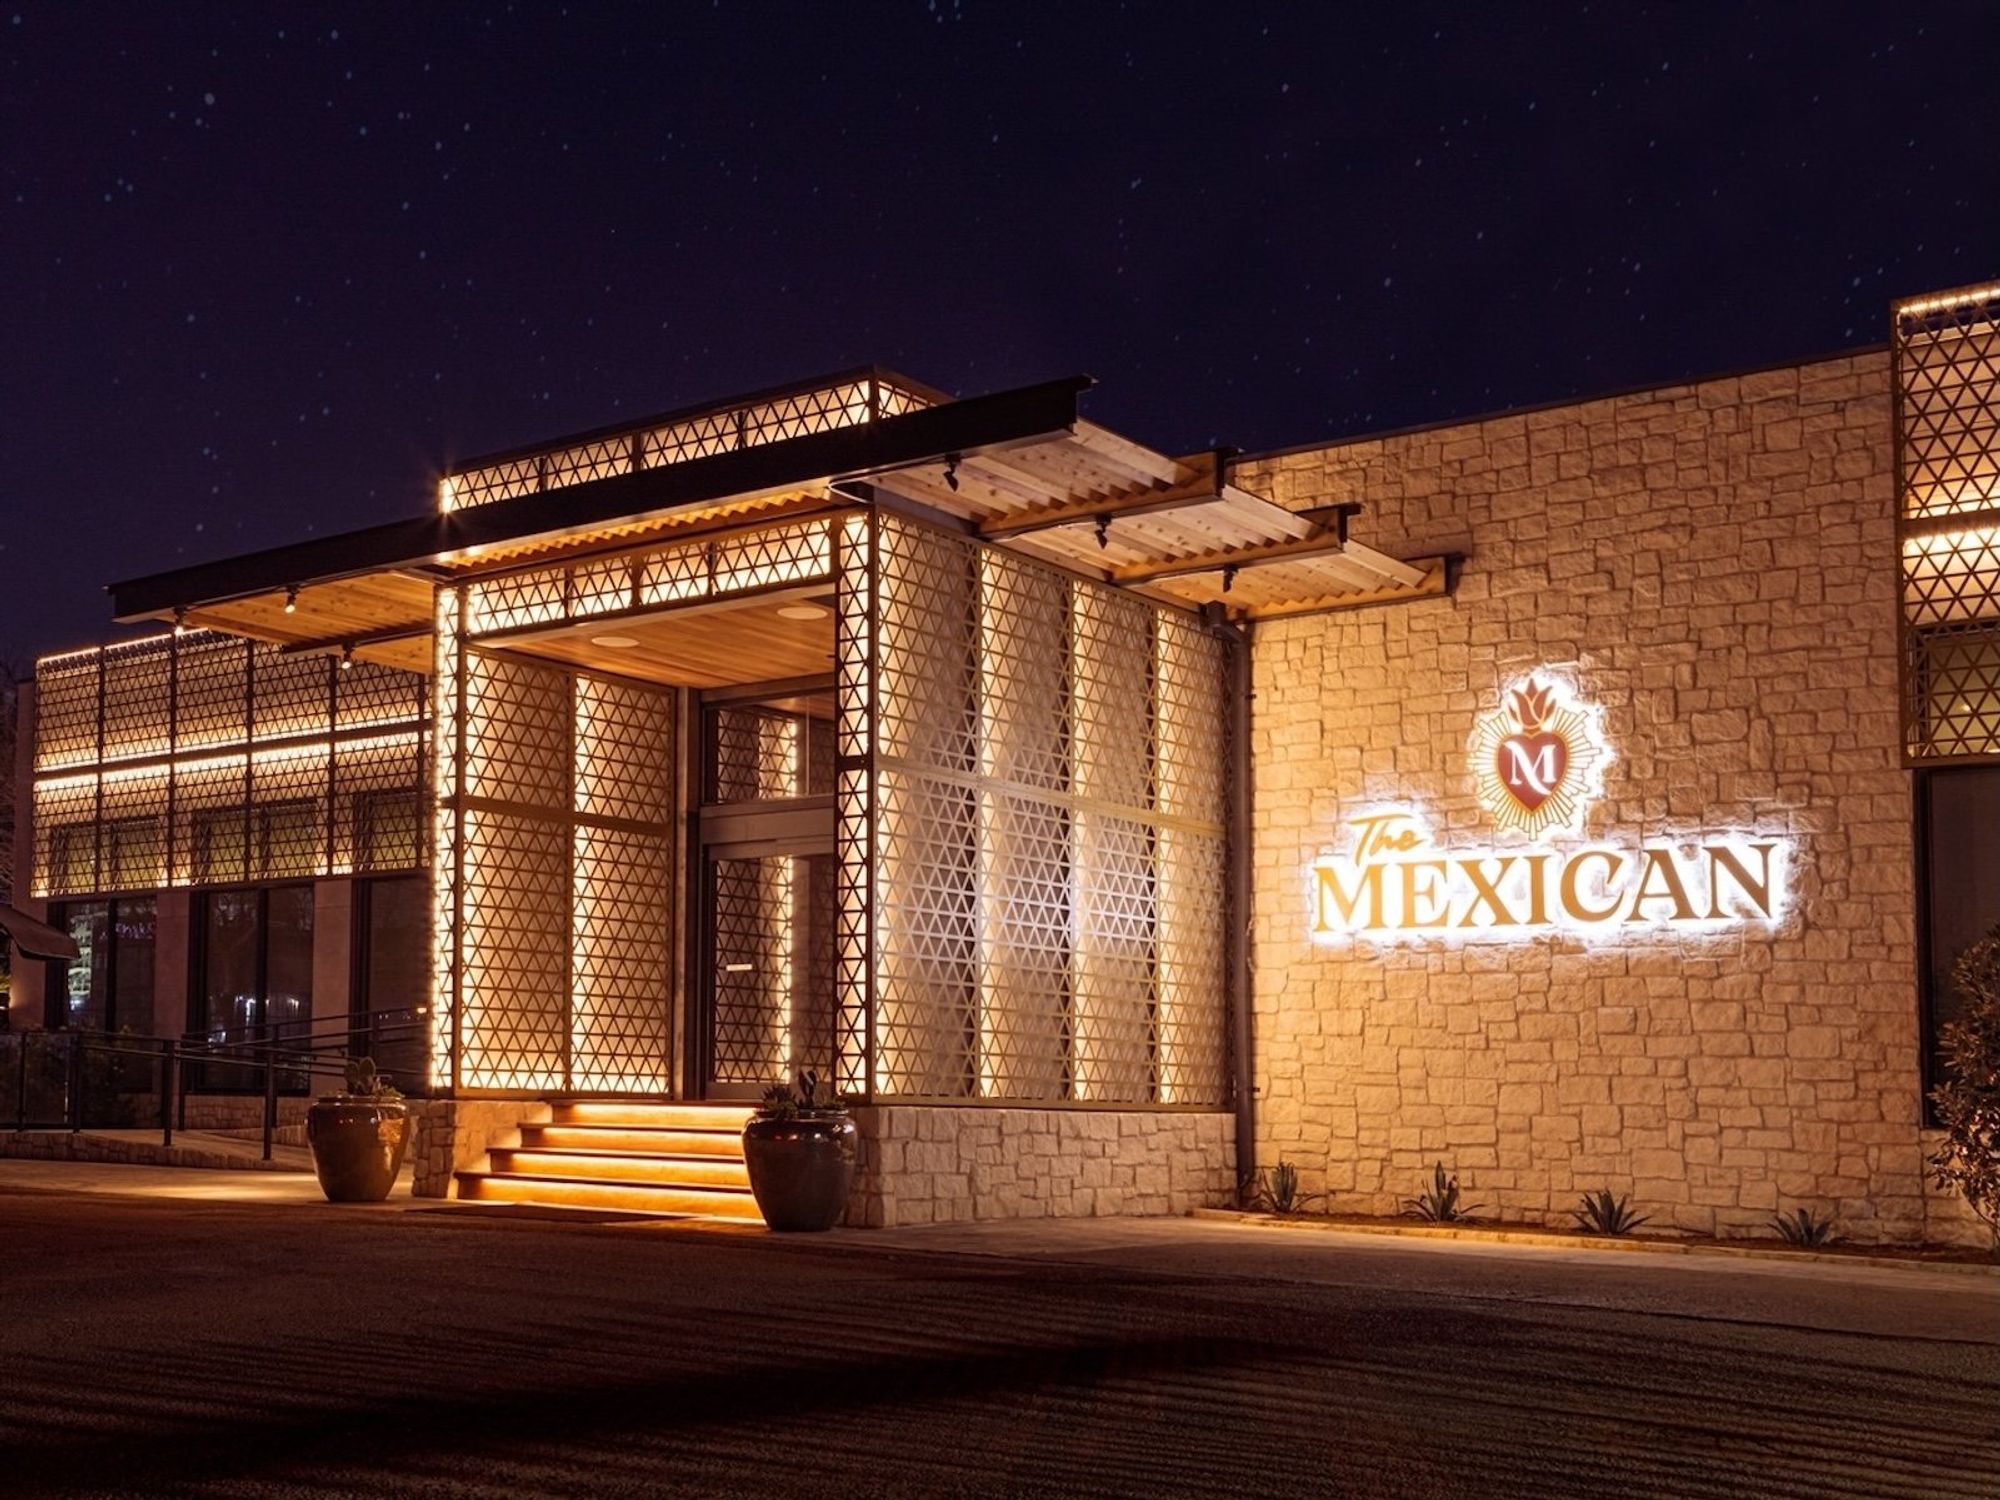 The Mexican restaurant exterior